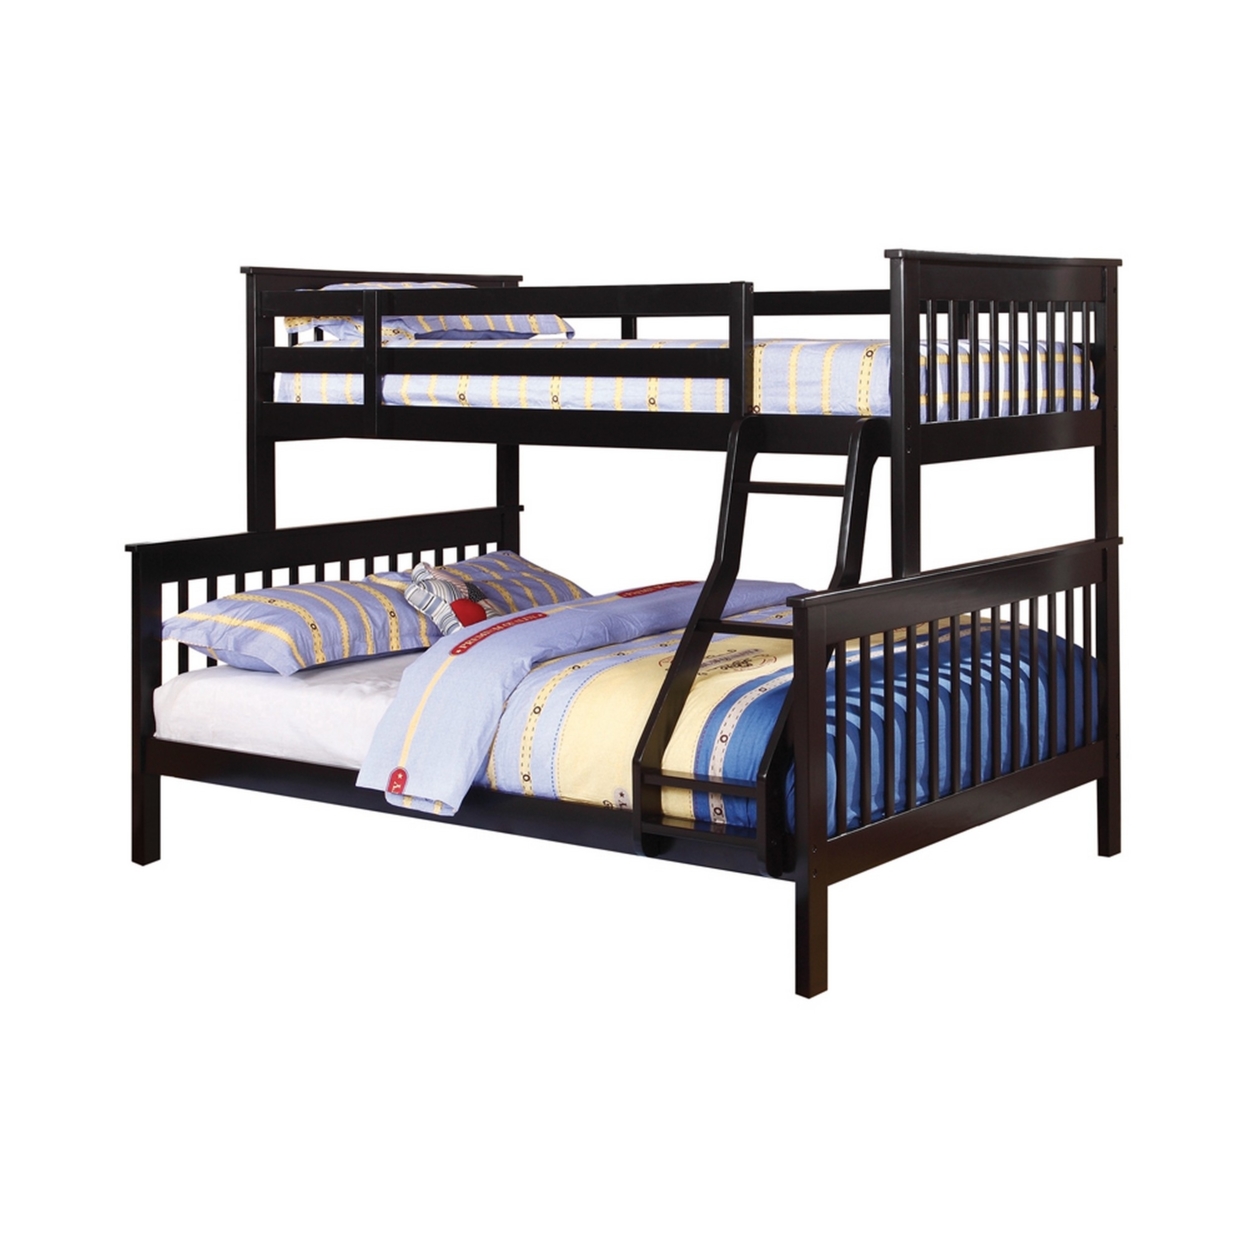 Mission Style Twin Over Full Bunk Bed With Attached Ladder, Black- Saltoro Sherpi